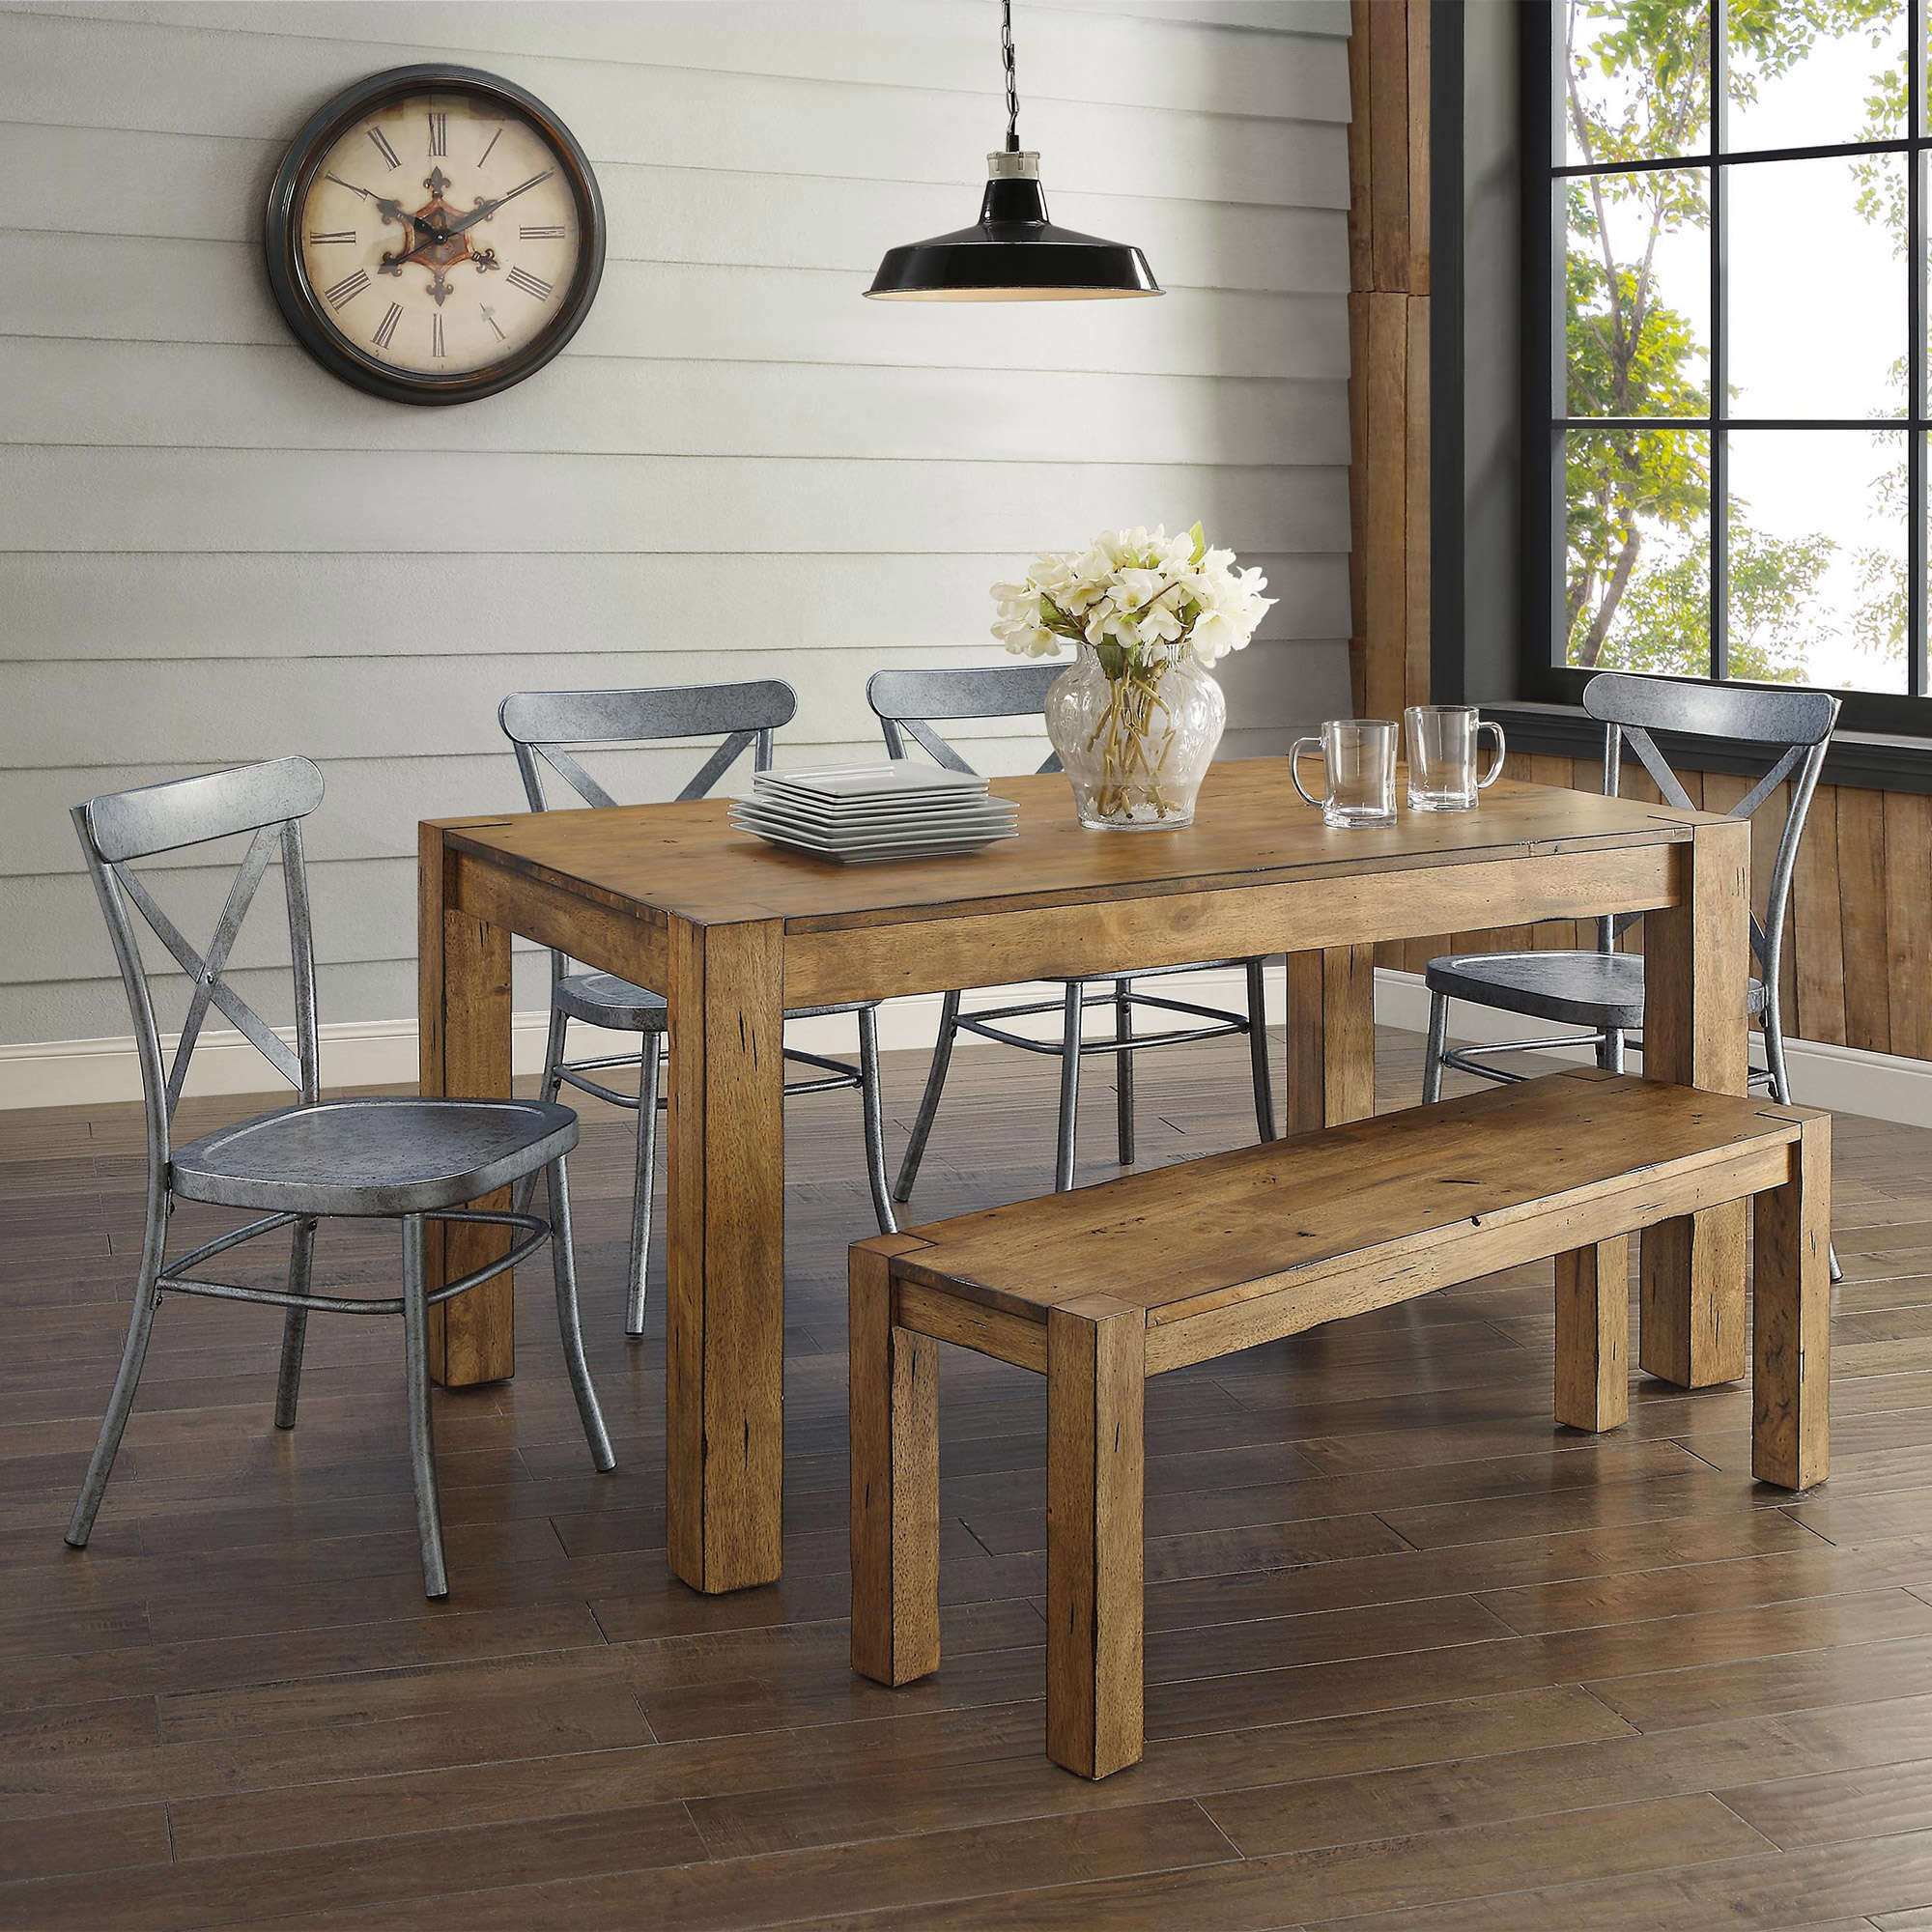 Better Homes & Gardens Bryant Solid Wood Dining Bench, Rustic Brown - image 3 of 8